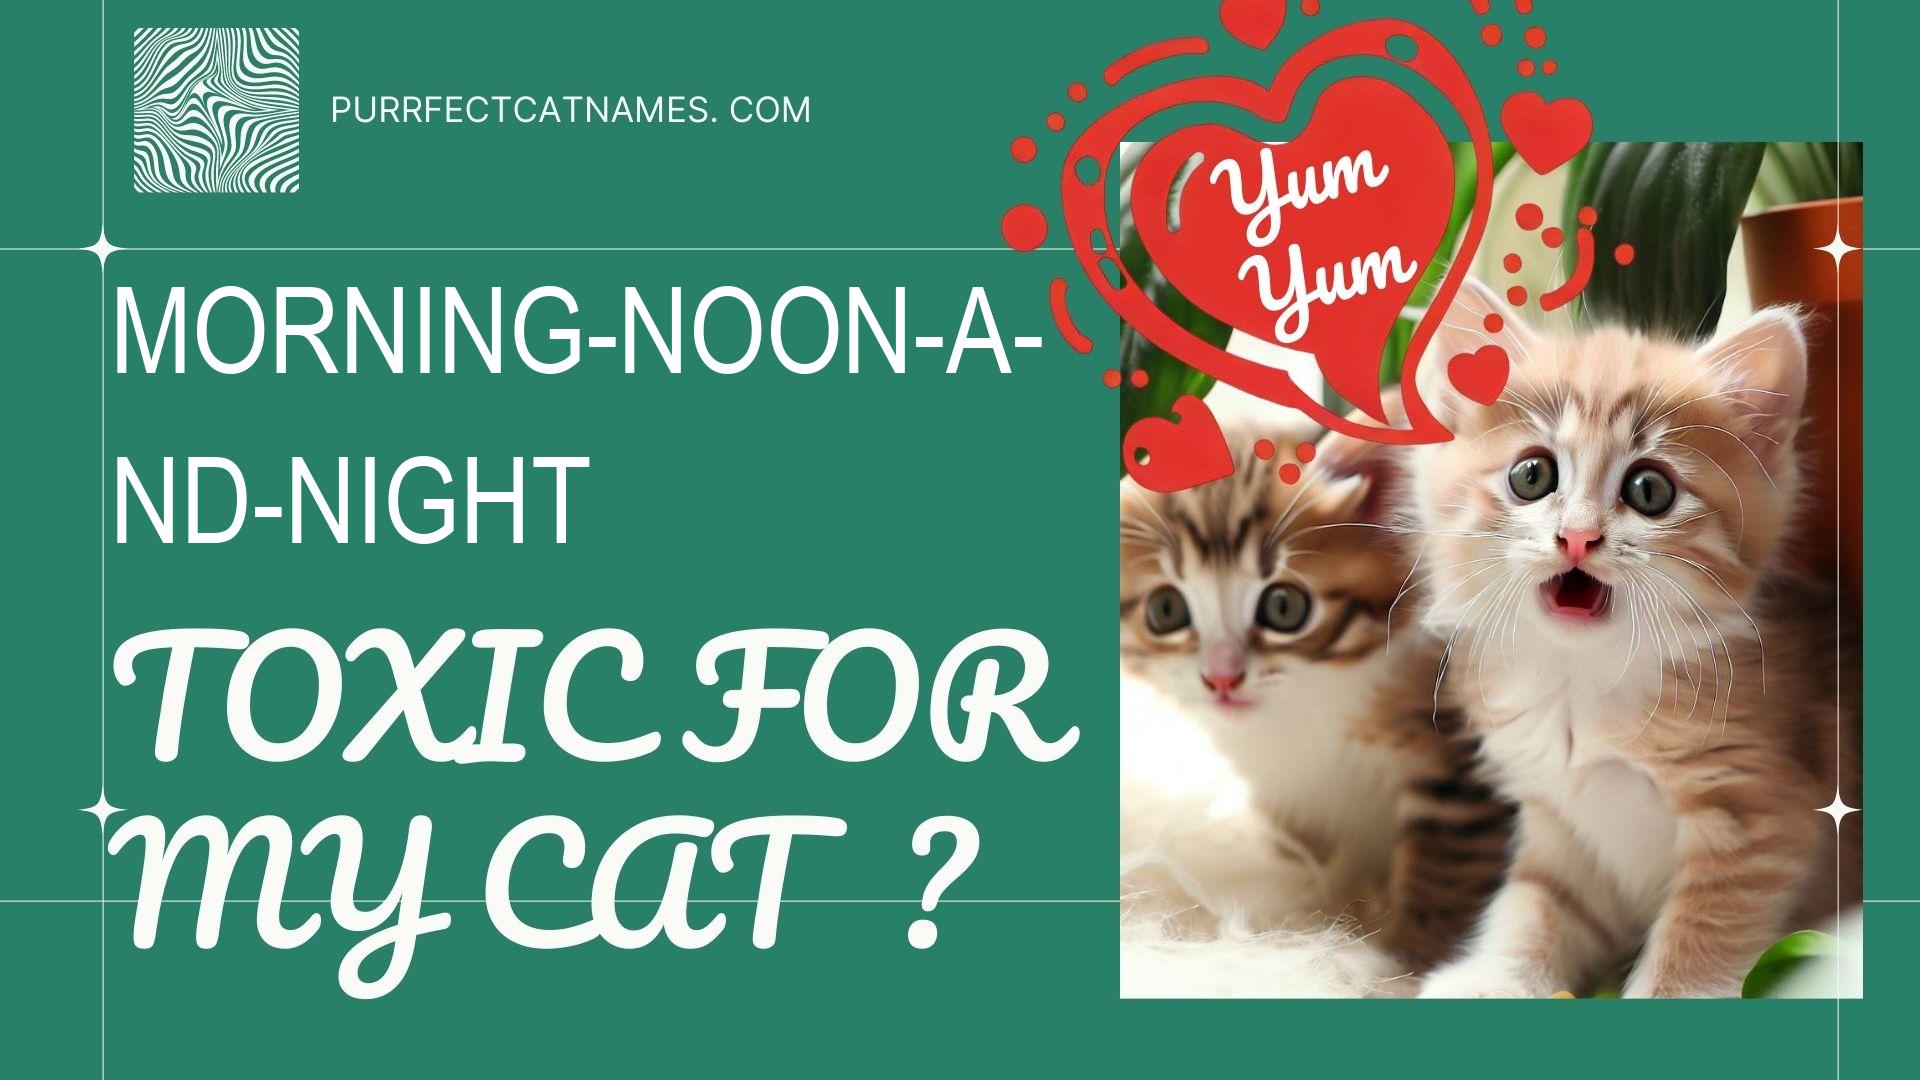 IsMorning-Noon-and-Night plant toxic for your cat